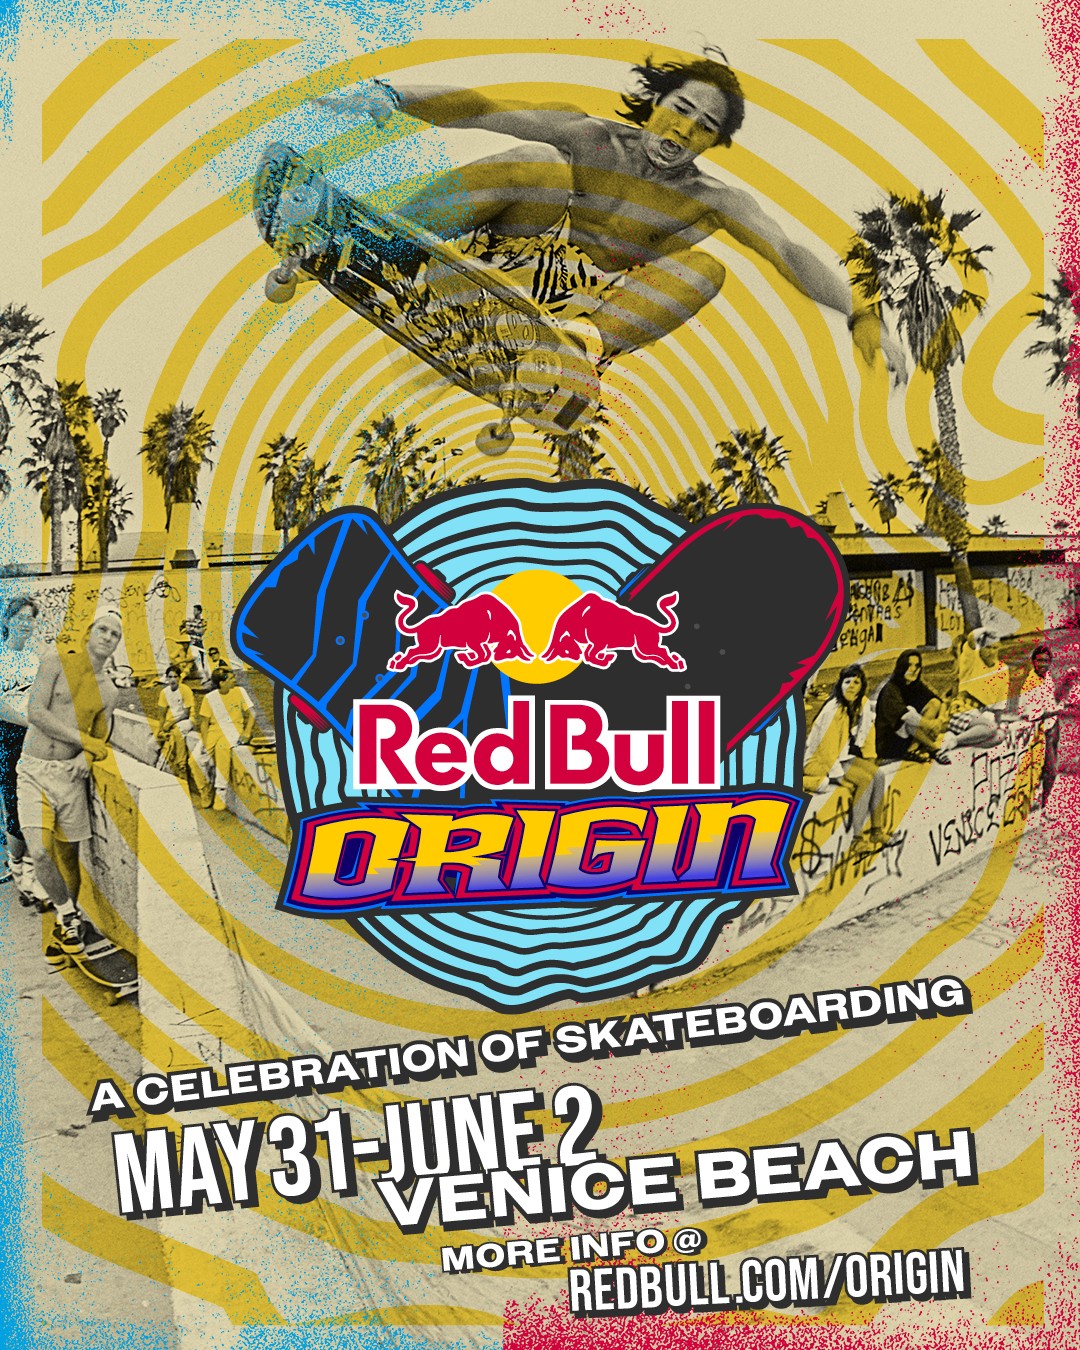 Red Bull Origin: A Celebration Of The Birthplace Of Modern Skateboarding Coming To Venice Beach, CA